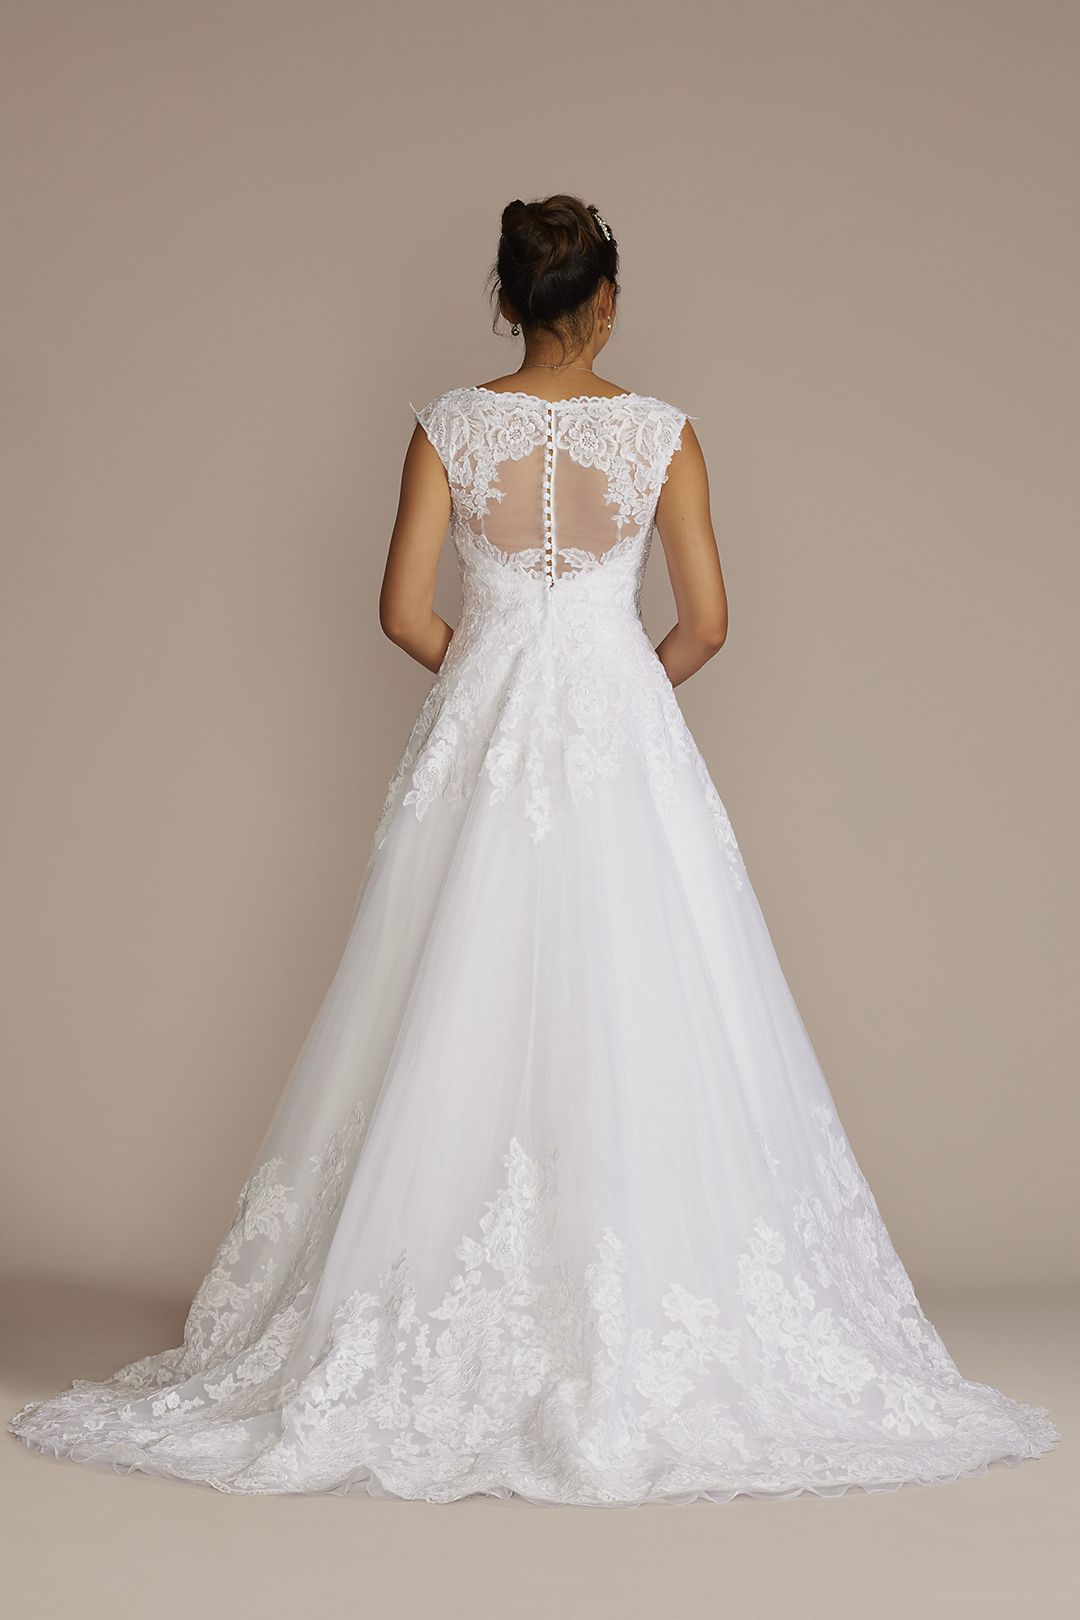 Scalloped Lace and Tulle Wedding Dress Image 2